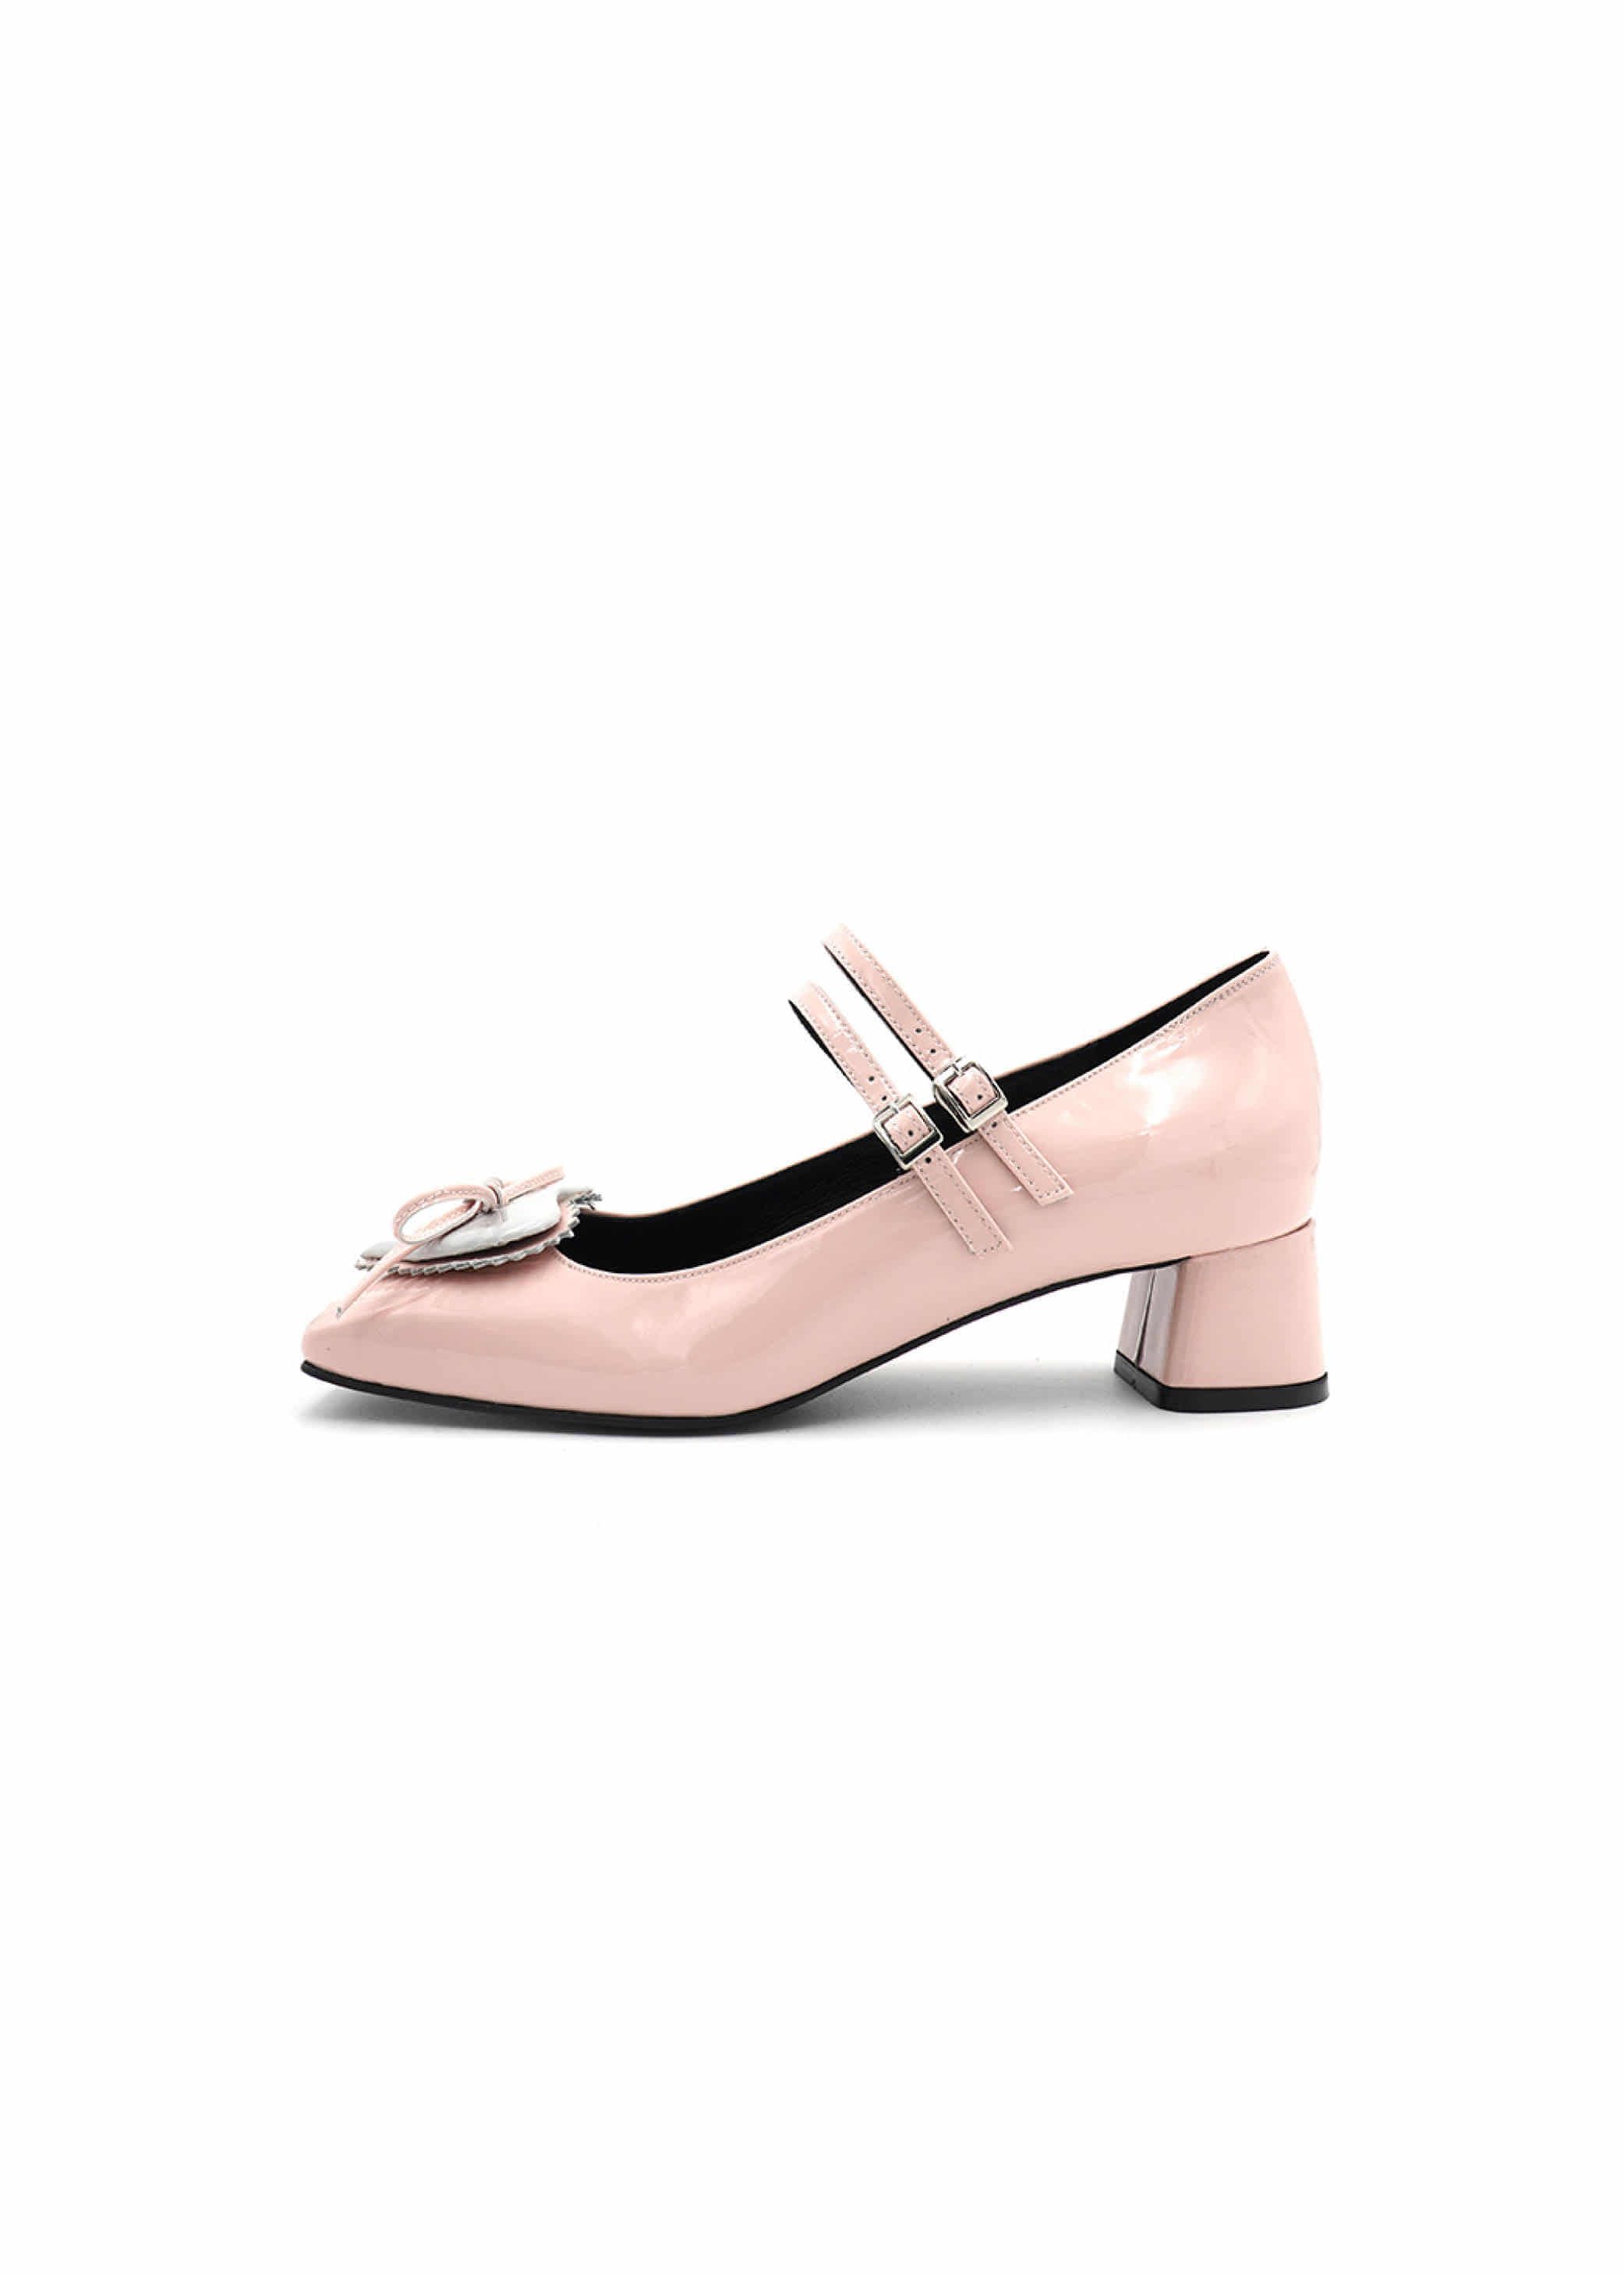 Y.13 Candy Mary-Jane Flats / Y.13-F34 / 4 colors